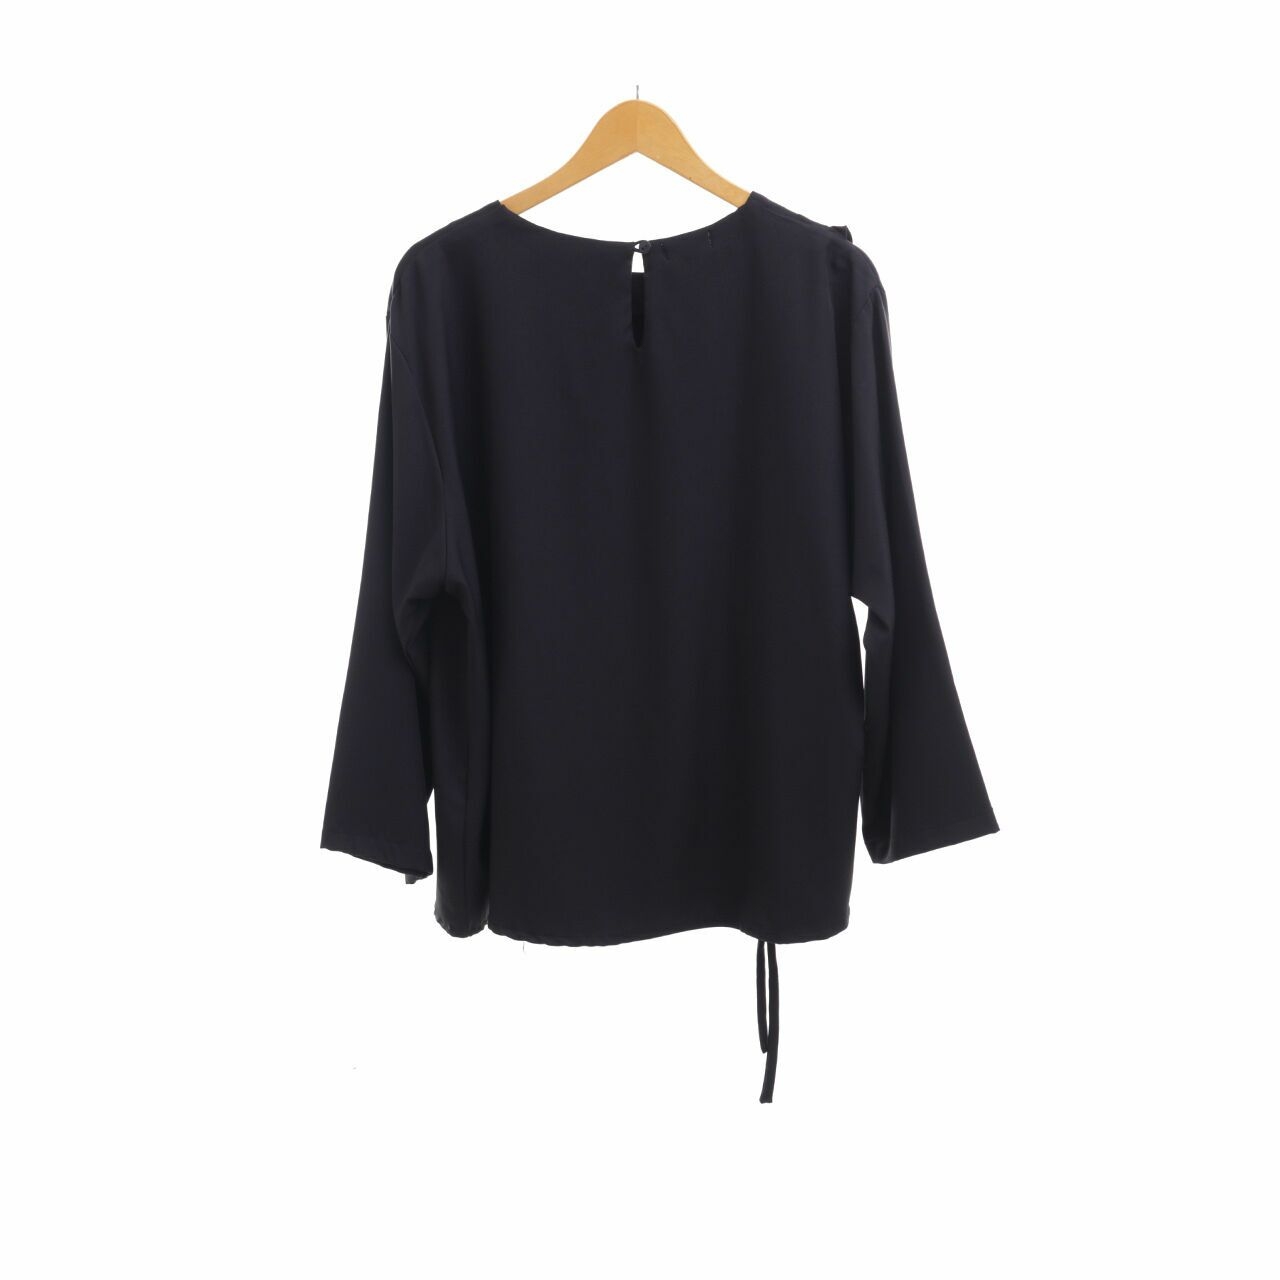 Love lucy Black Blouse